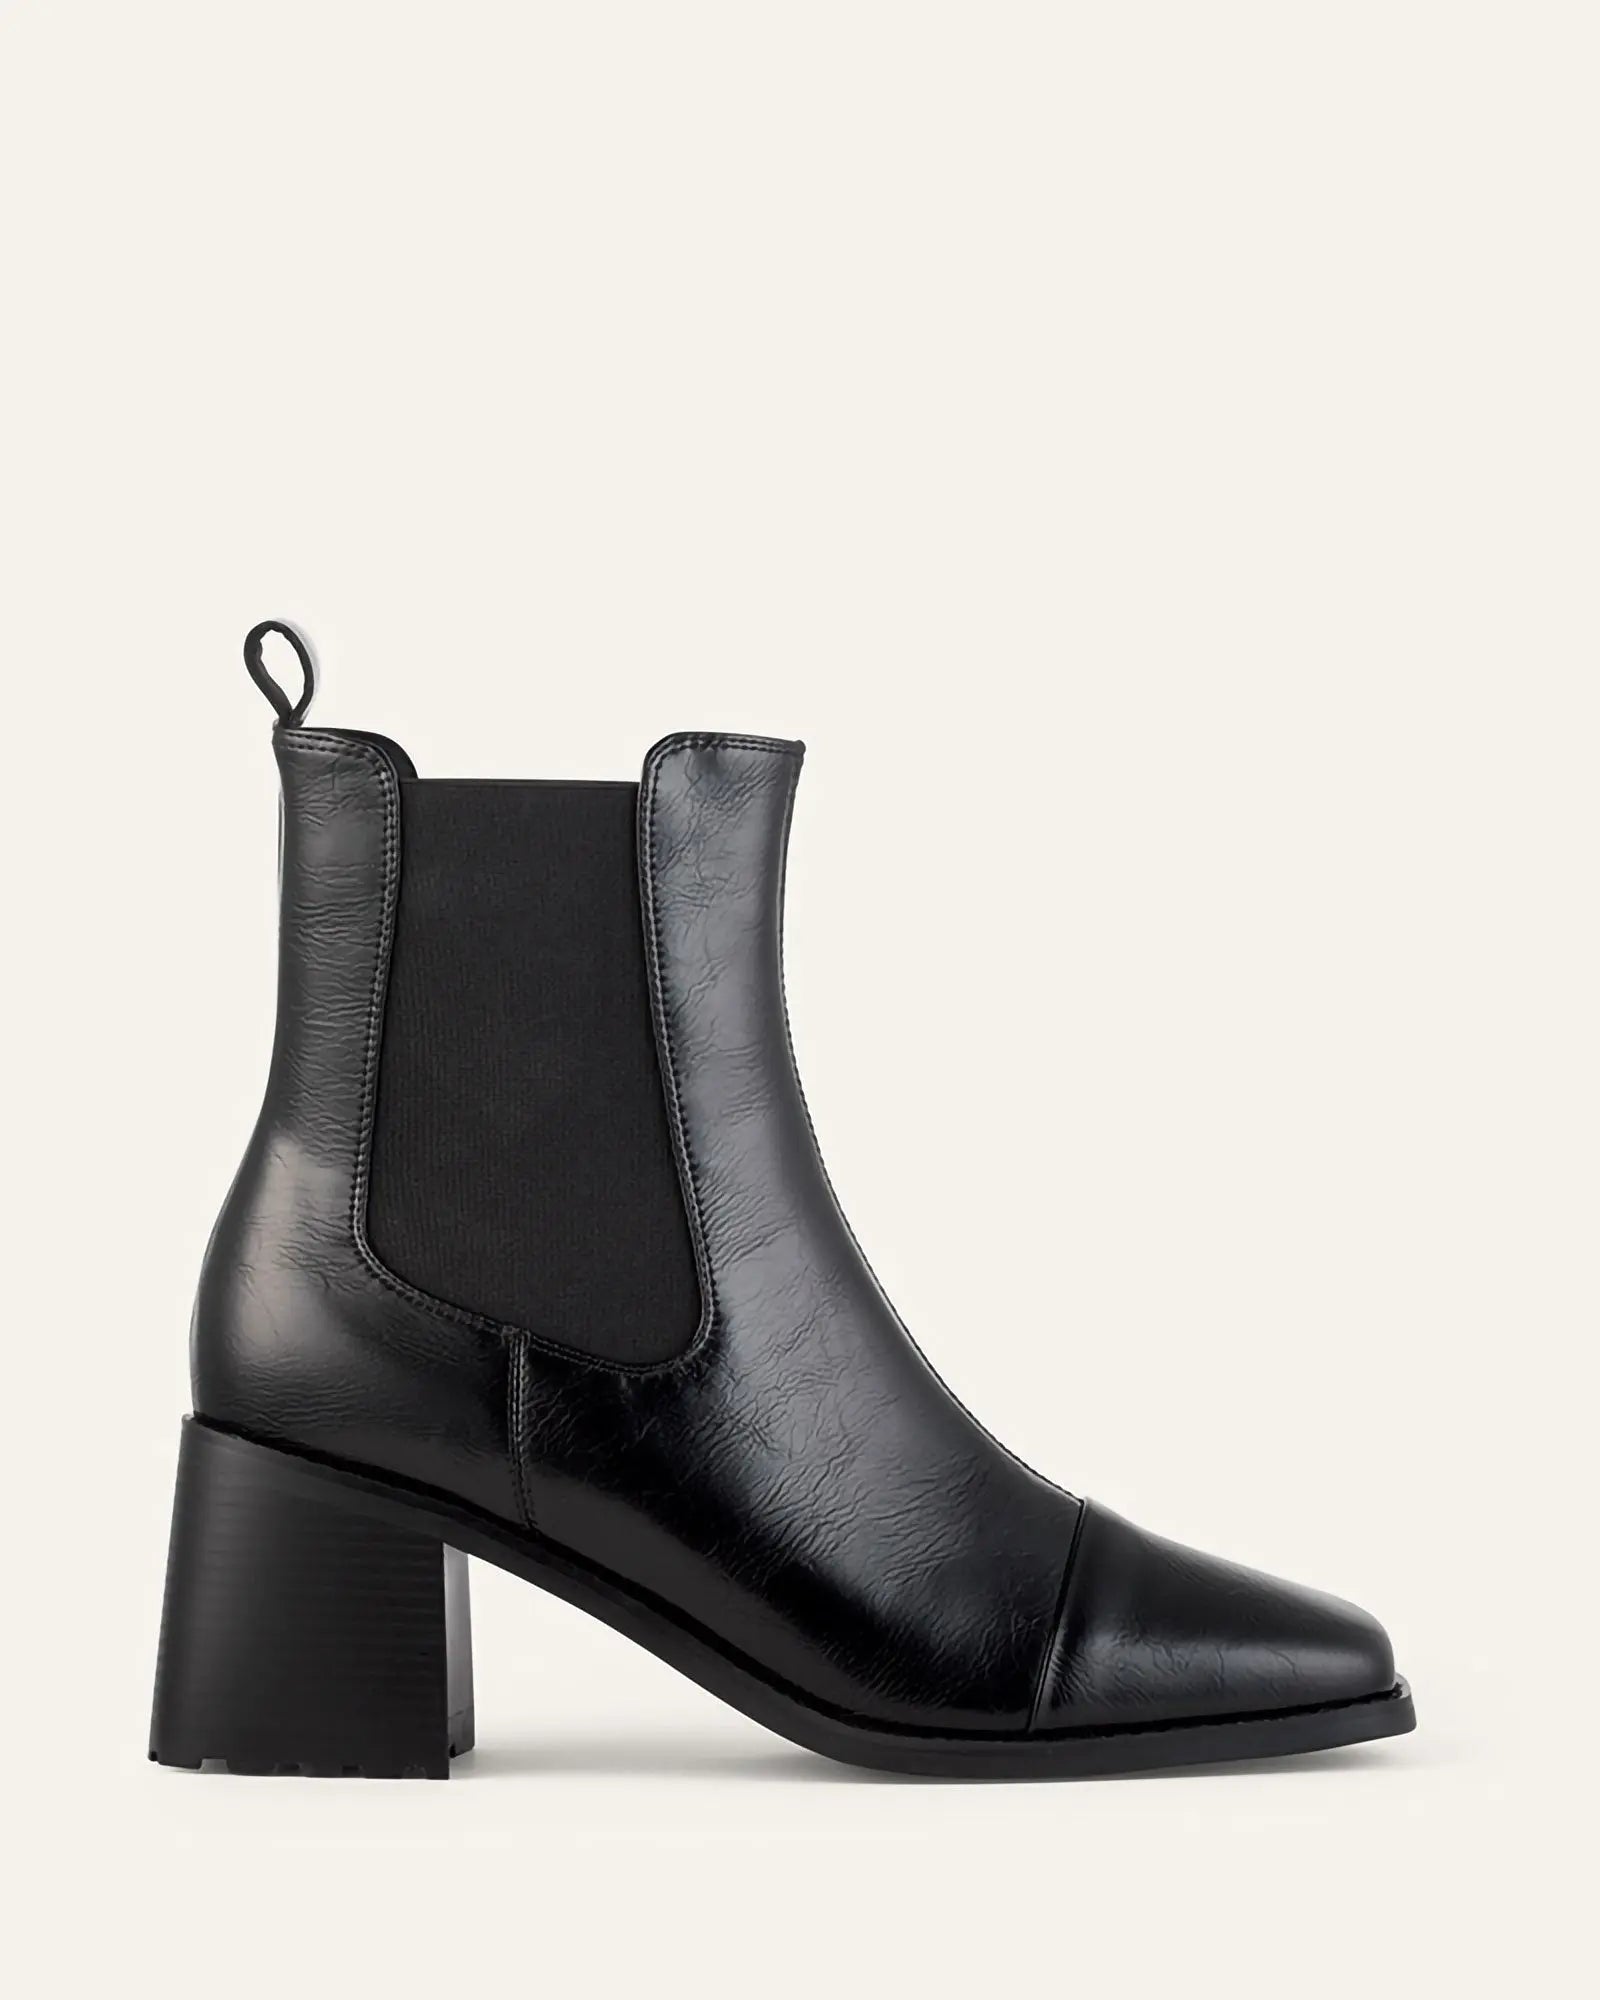 Cameron Ankle Boot Black Leather